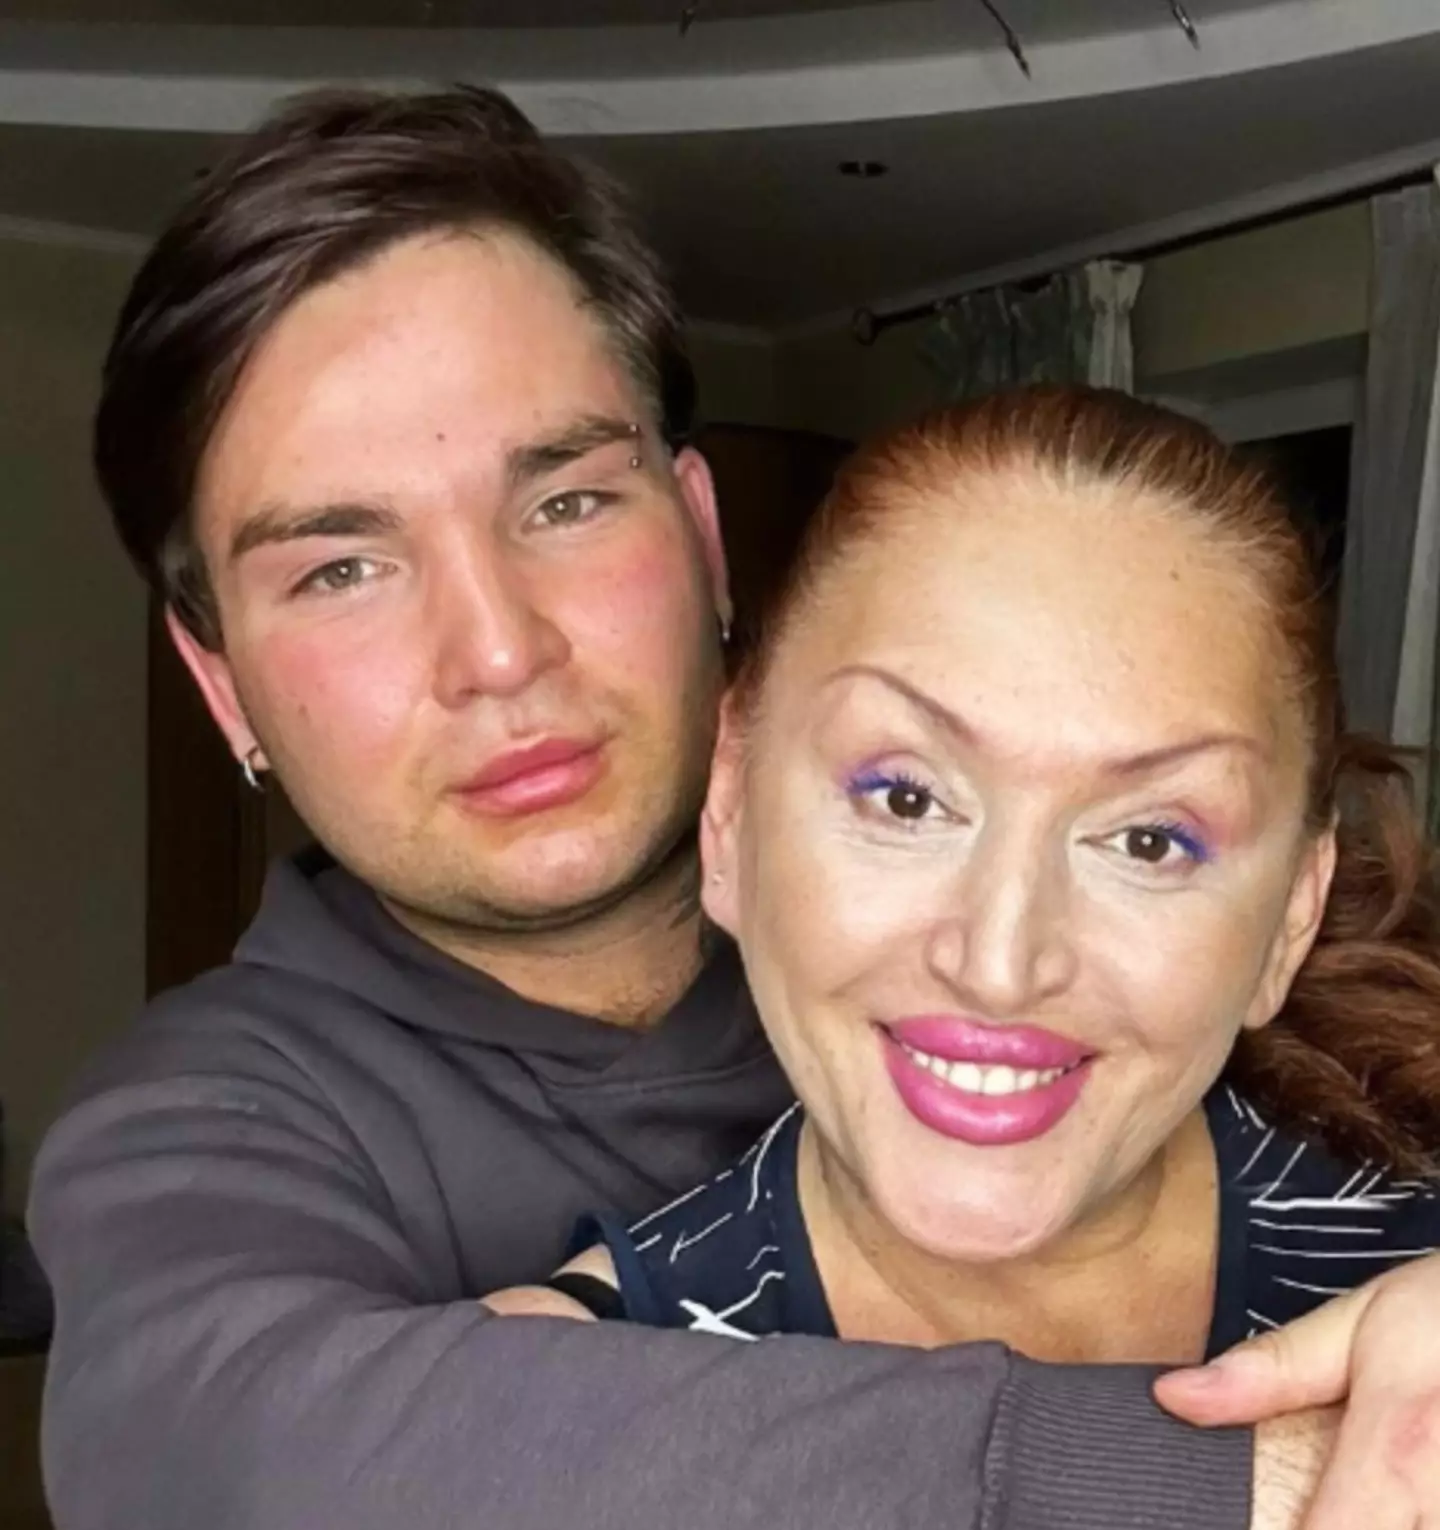 The Russian woman married her adopted son 31 years her junior.